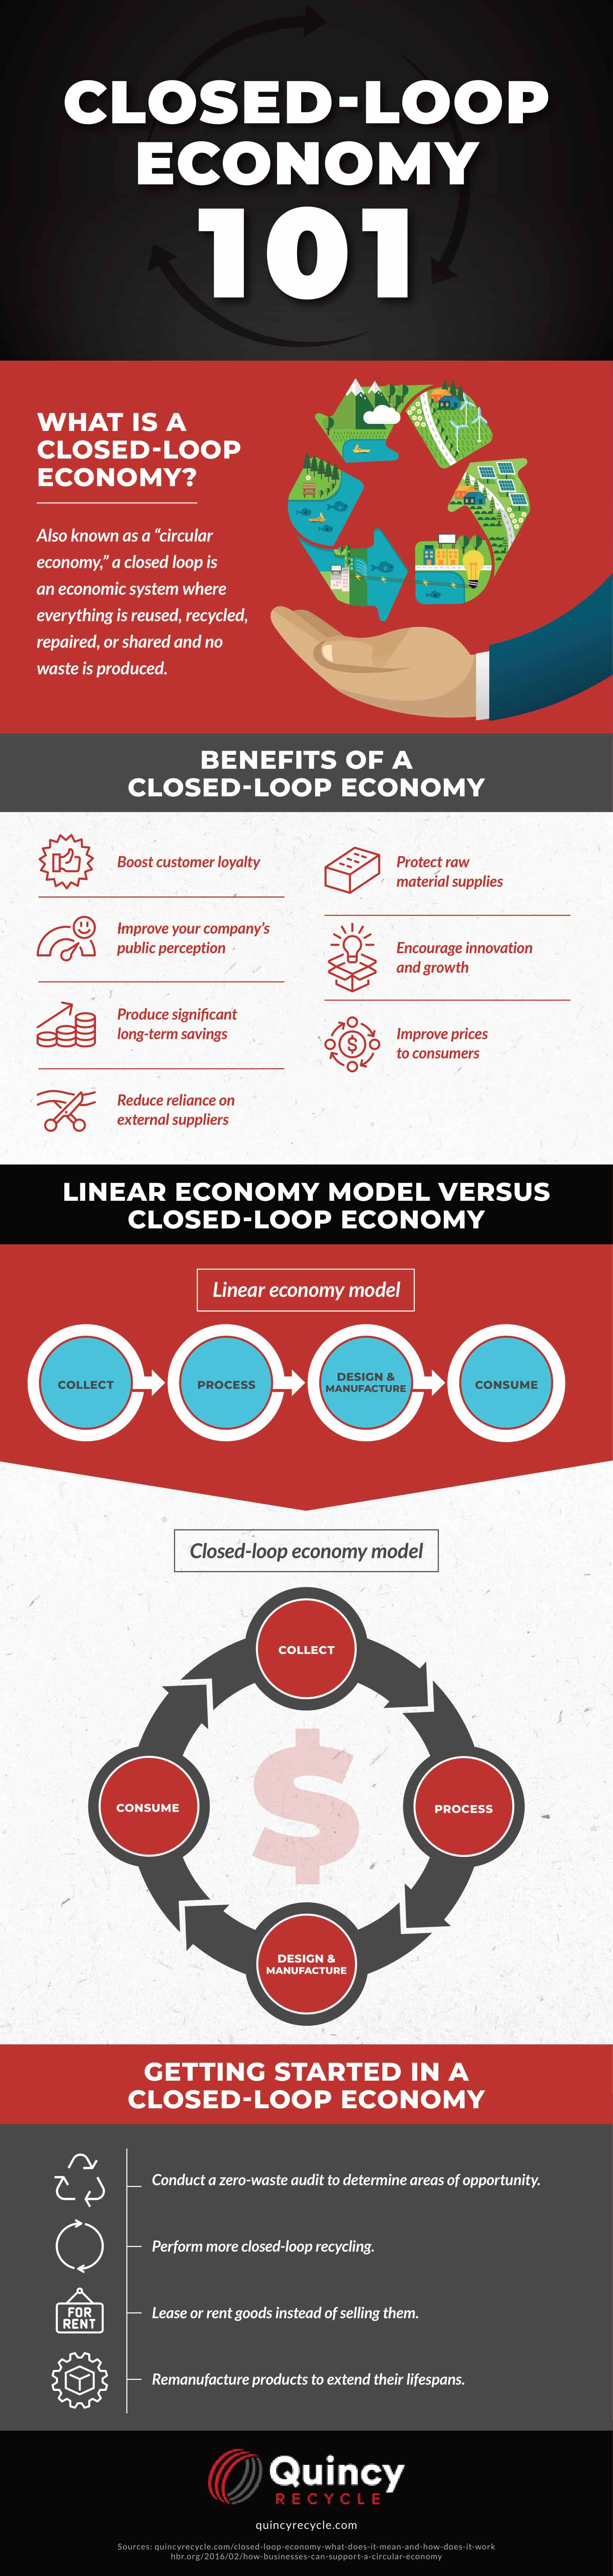 Closed Loop Economy 101 Infographic Quincy 1, Industry Today